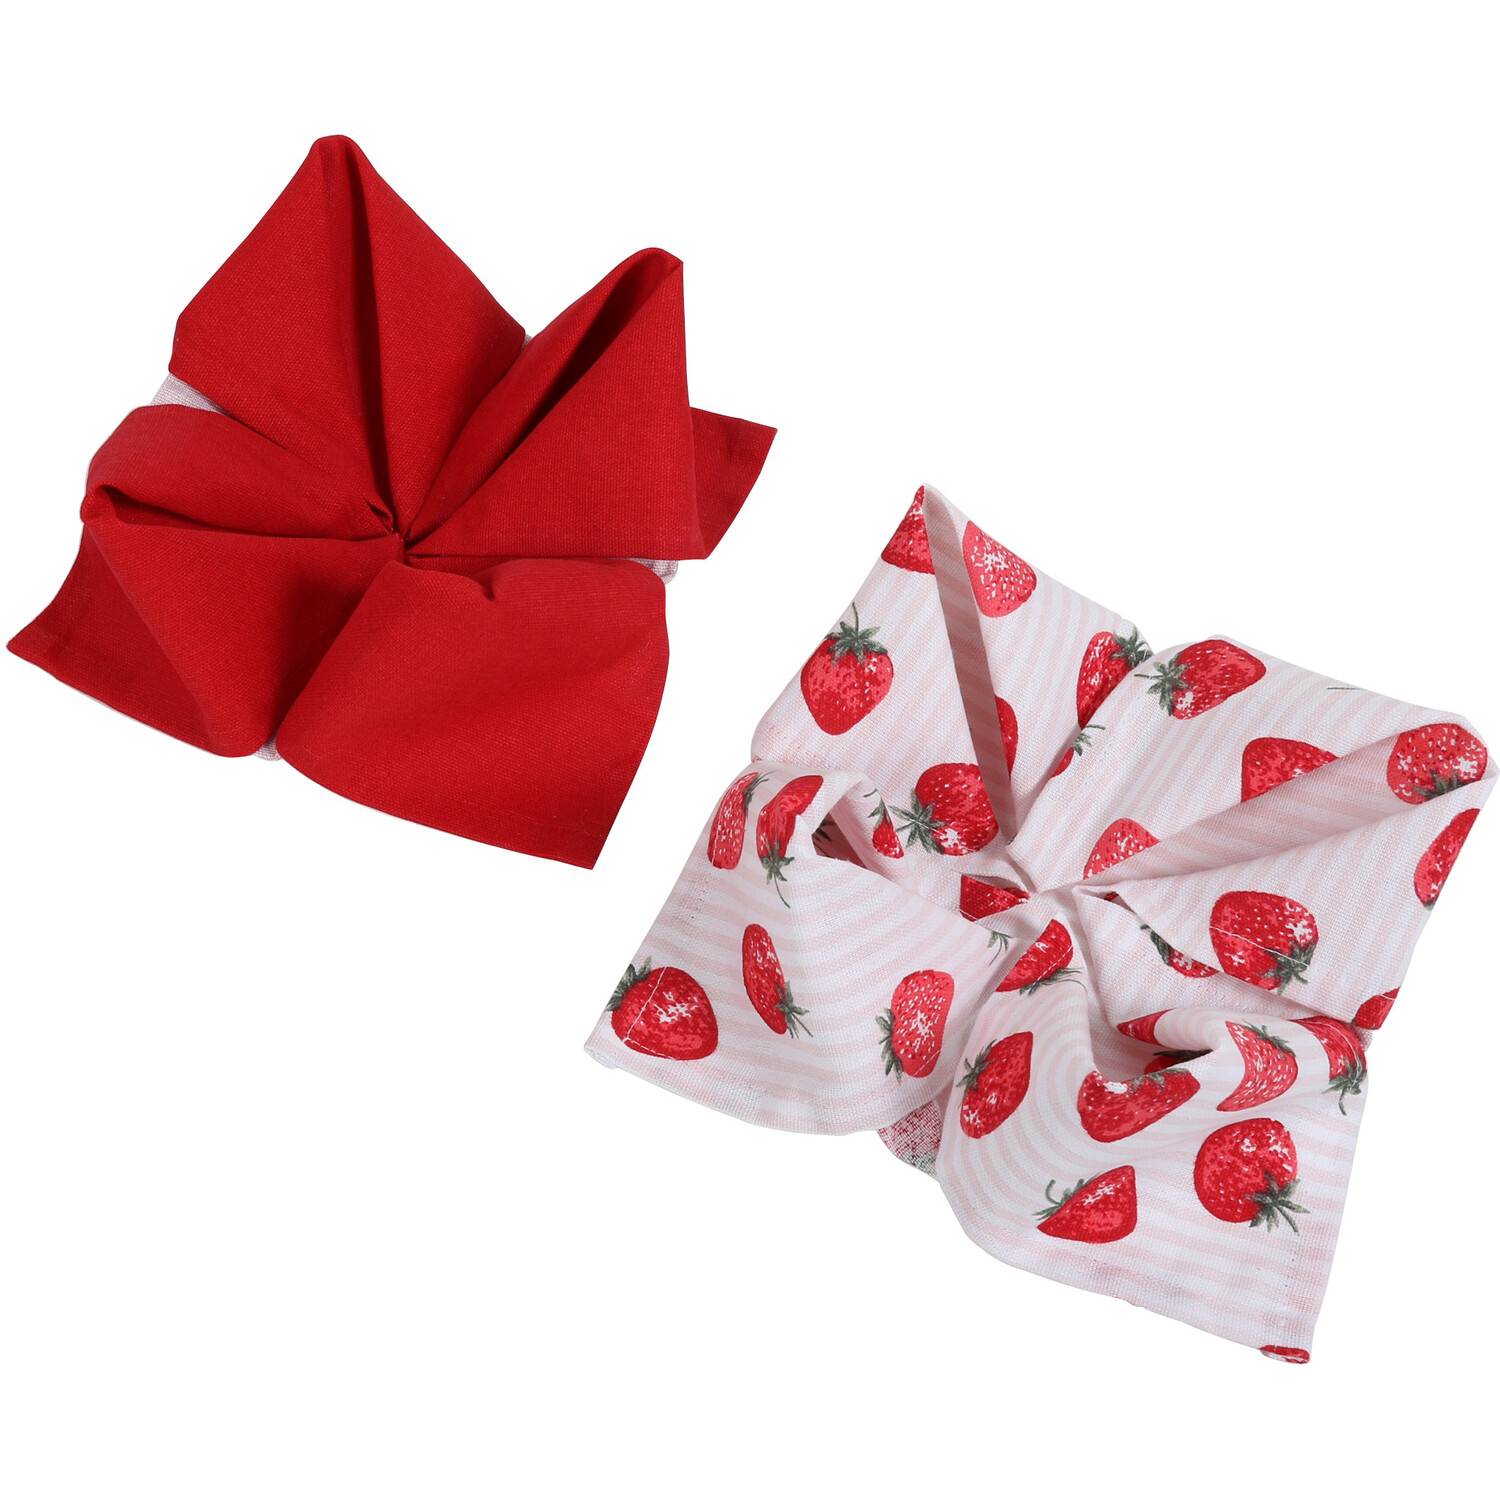 Pack of 2 Strawberry Napkins - Red Image 4